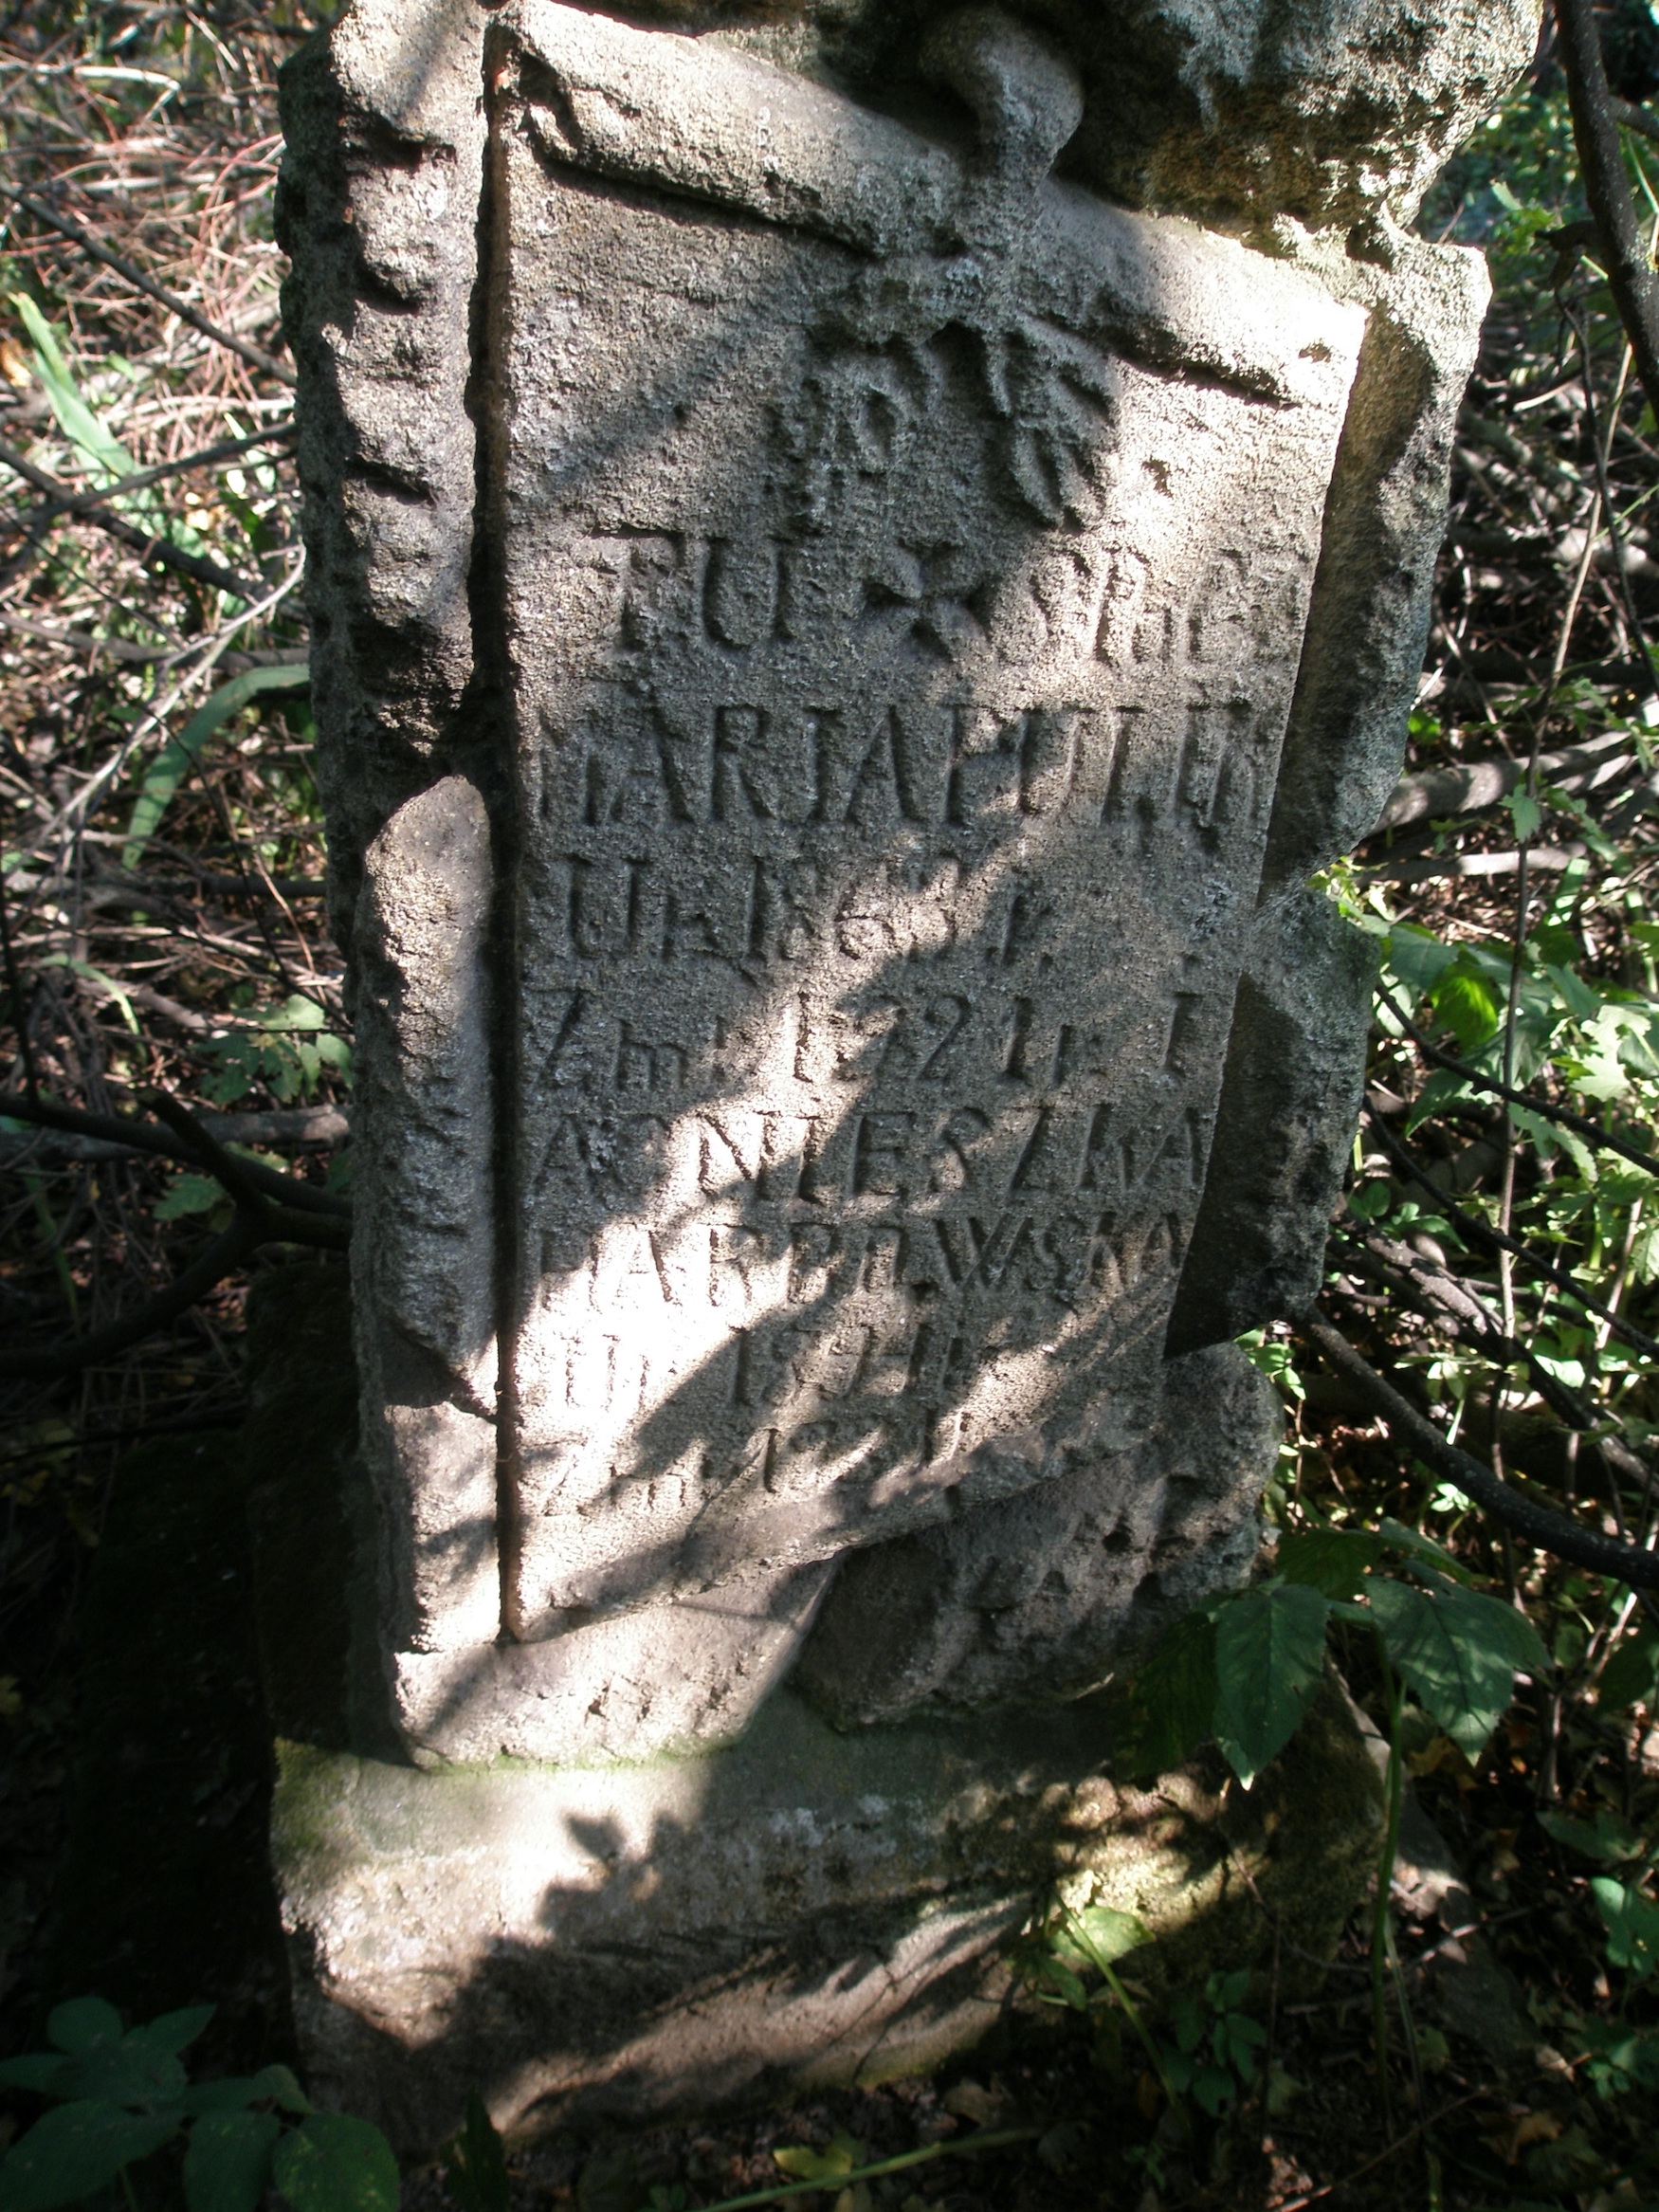 Tombstone of Agnieszka Harbowska and Maria Puler, Podles cemetery, as of 2006.